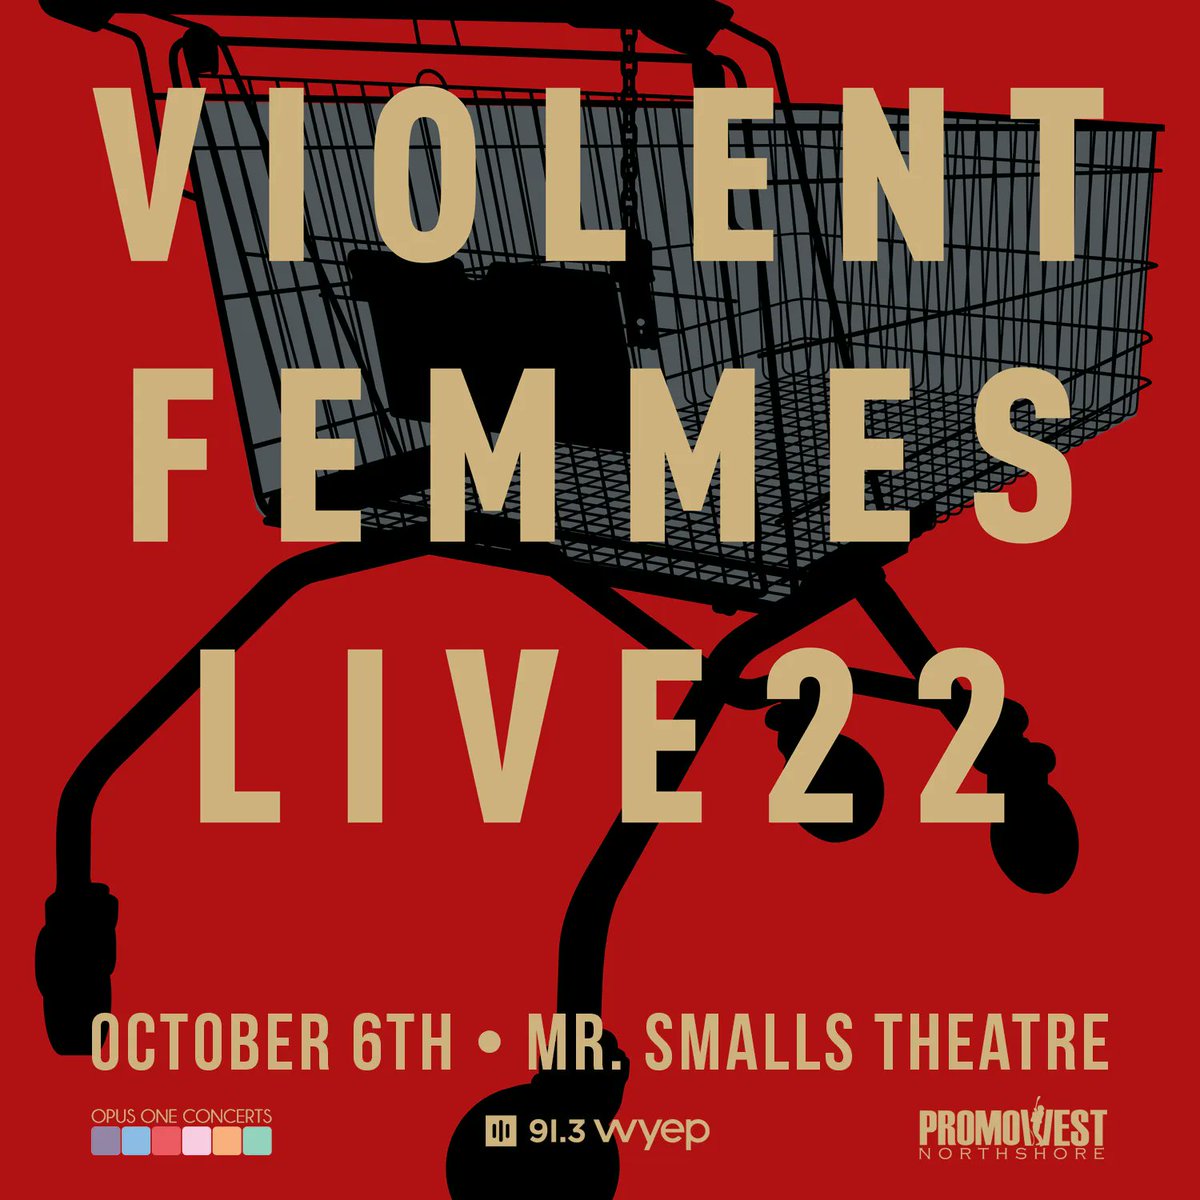 🚨G I V E A W A Y ALERT!🚨 We've got some tix to see @violentfemmes on Oct 6th, 2022 at @MrSmallsTheatre Enter for a chance at a pair: bit.ly/3mReN0Y #wyep #pittsburgh #violentfemmes #mrsmallstheatre #concert #tickets #music #free